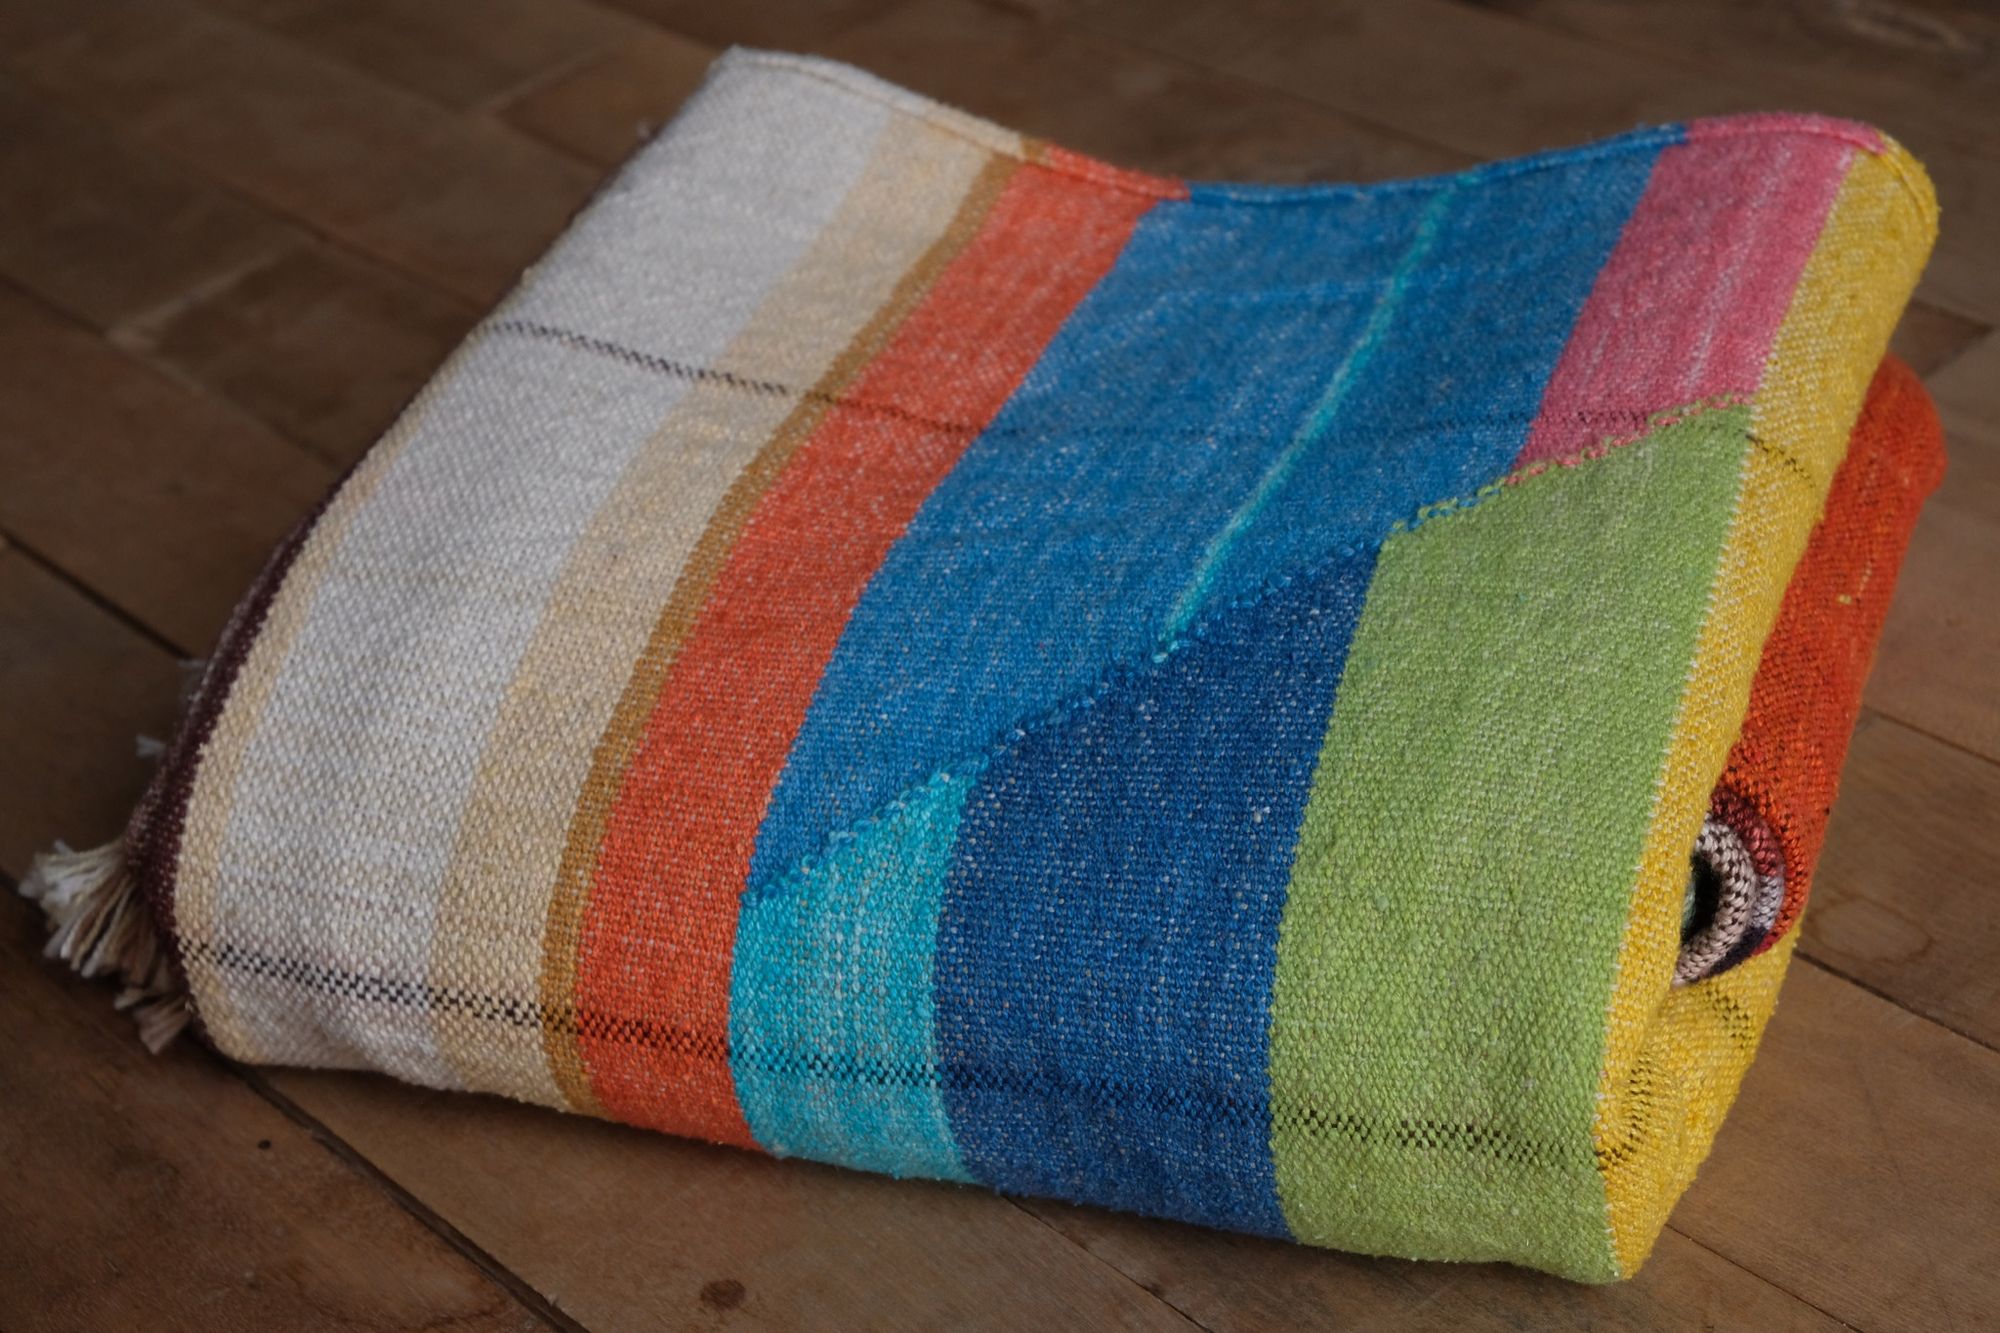 many colored handwoven fabric folded laying on a wooden floor